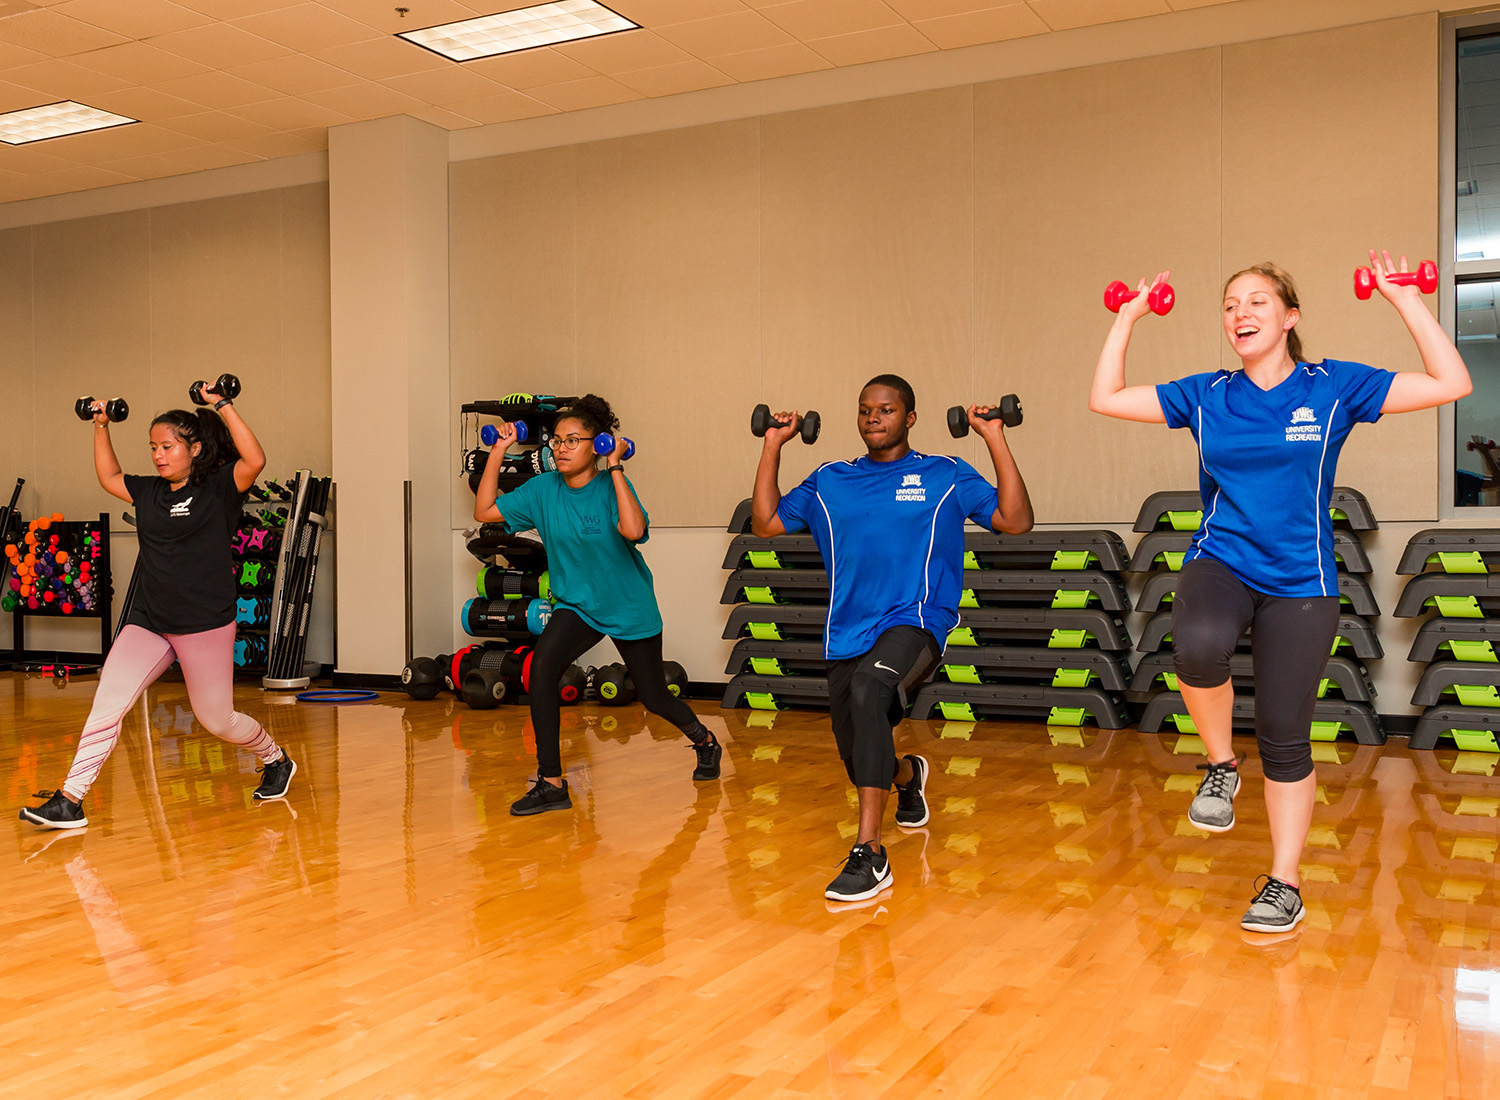 Campus Recreation - Group Fitness Classes